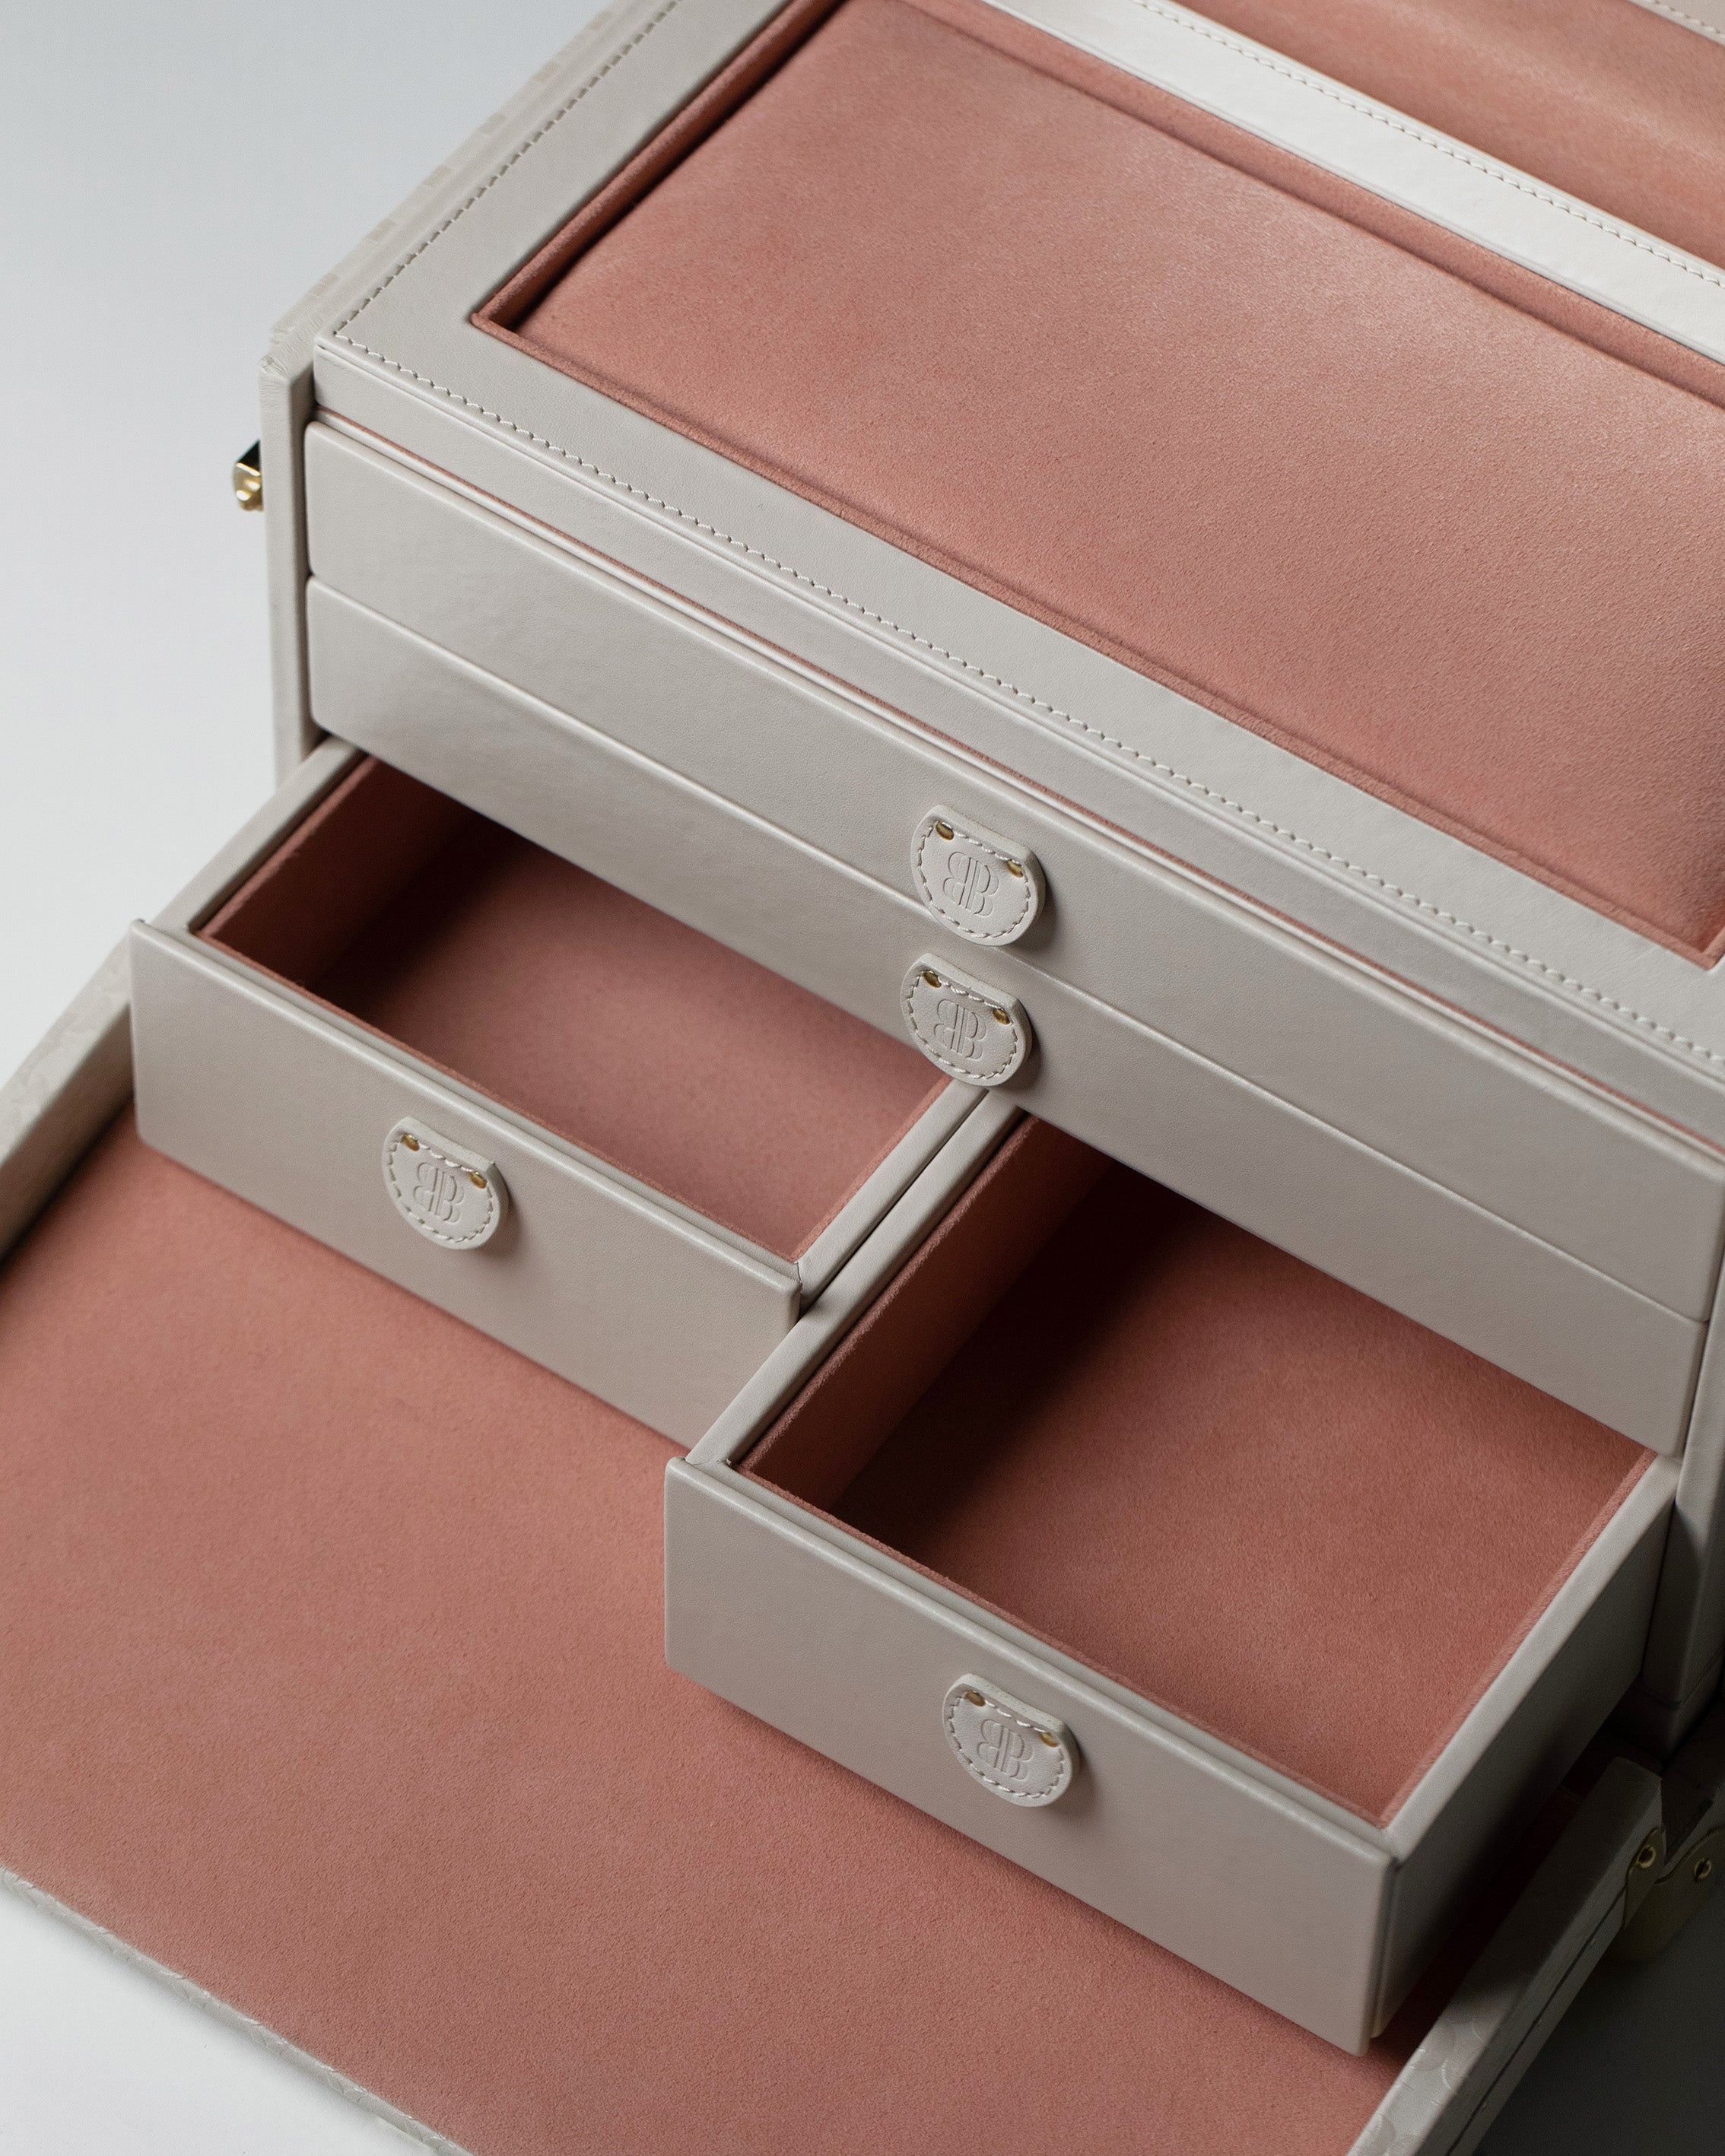 Jewelry Holder Bernardini Milano made of pink leather and alcantara - with different trays details